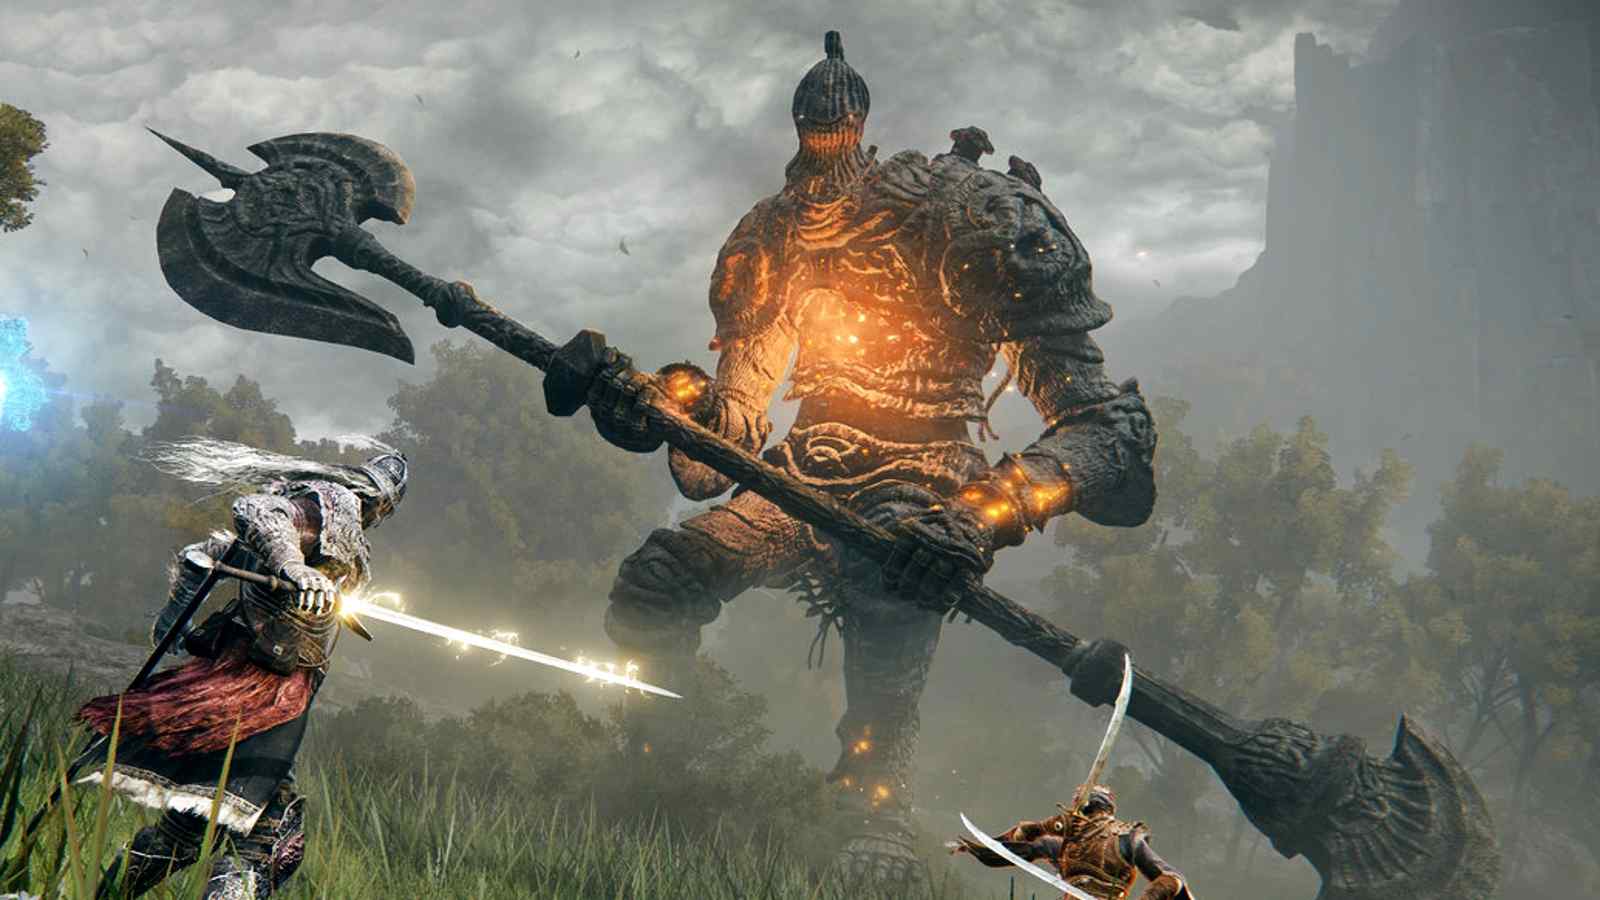 Hidetaka Miyazaki, the creator of the influential DARK SOULS video game series, along with George R. R. Martin, has created a new fantasy world called Journey through the Lands Between. 